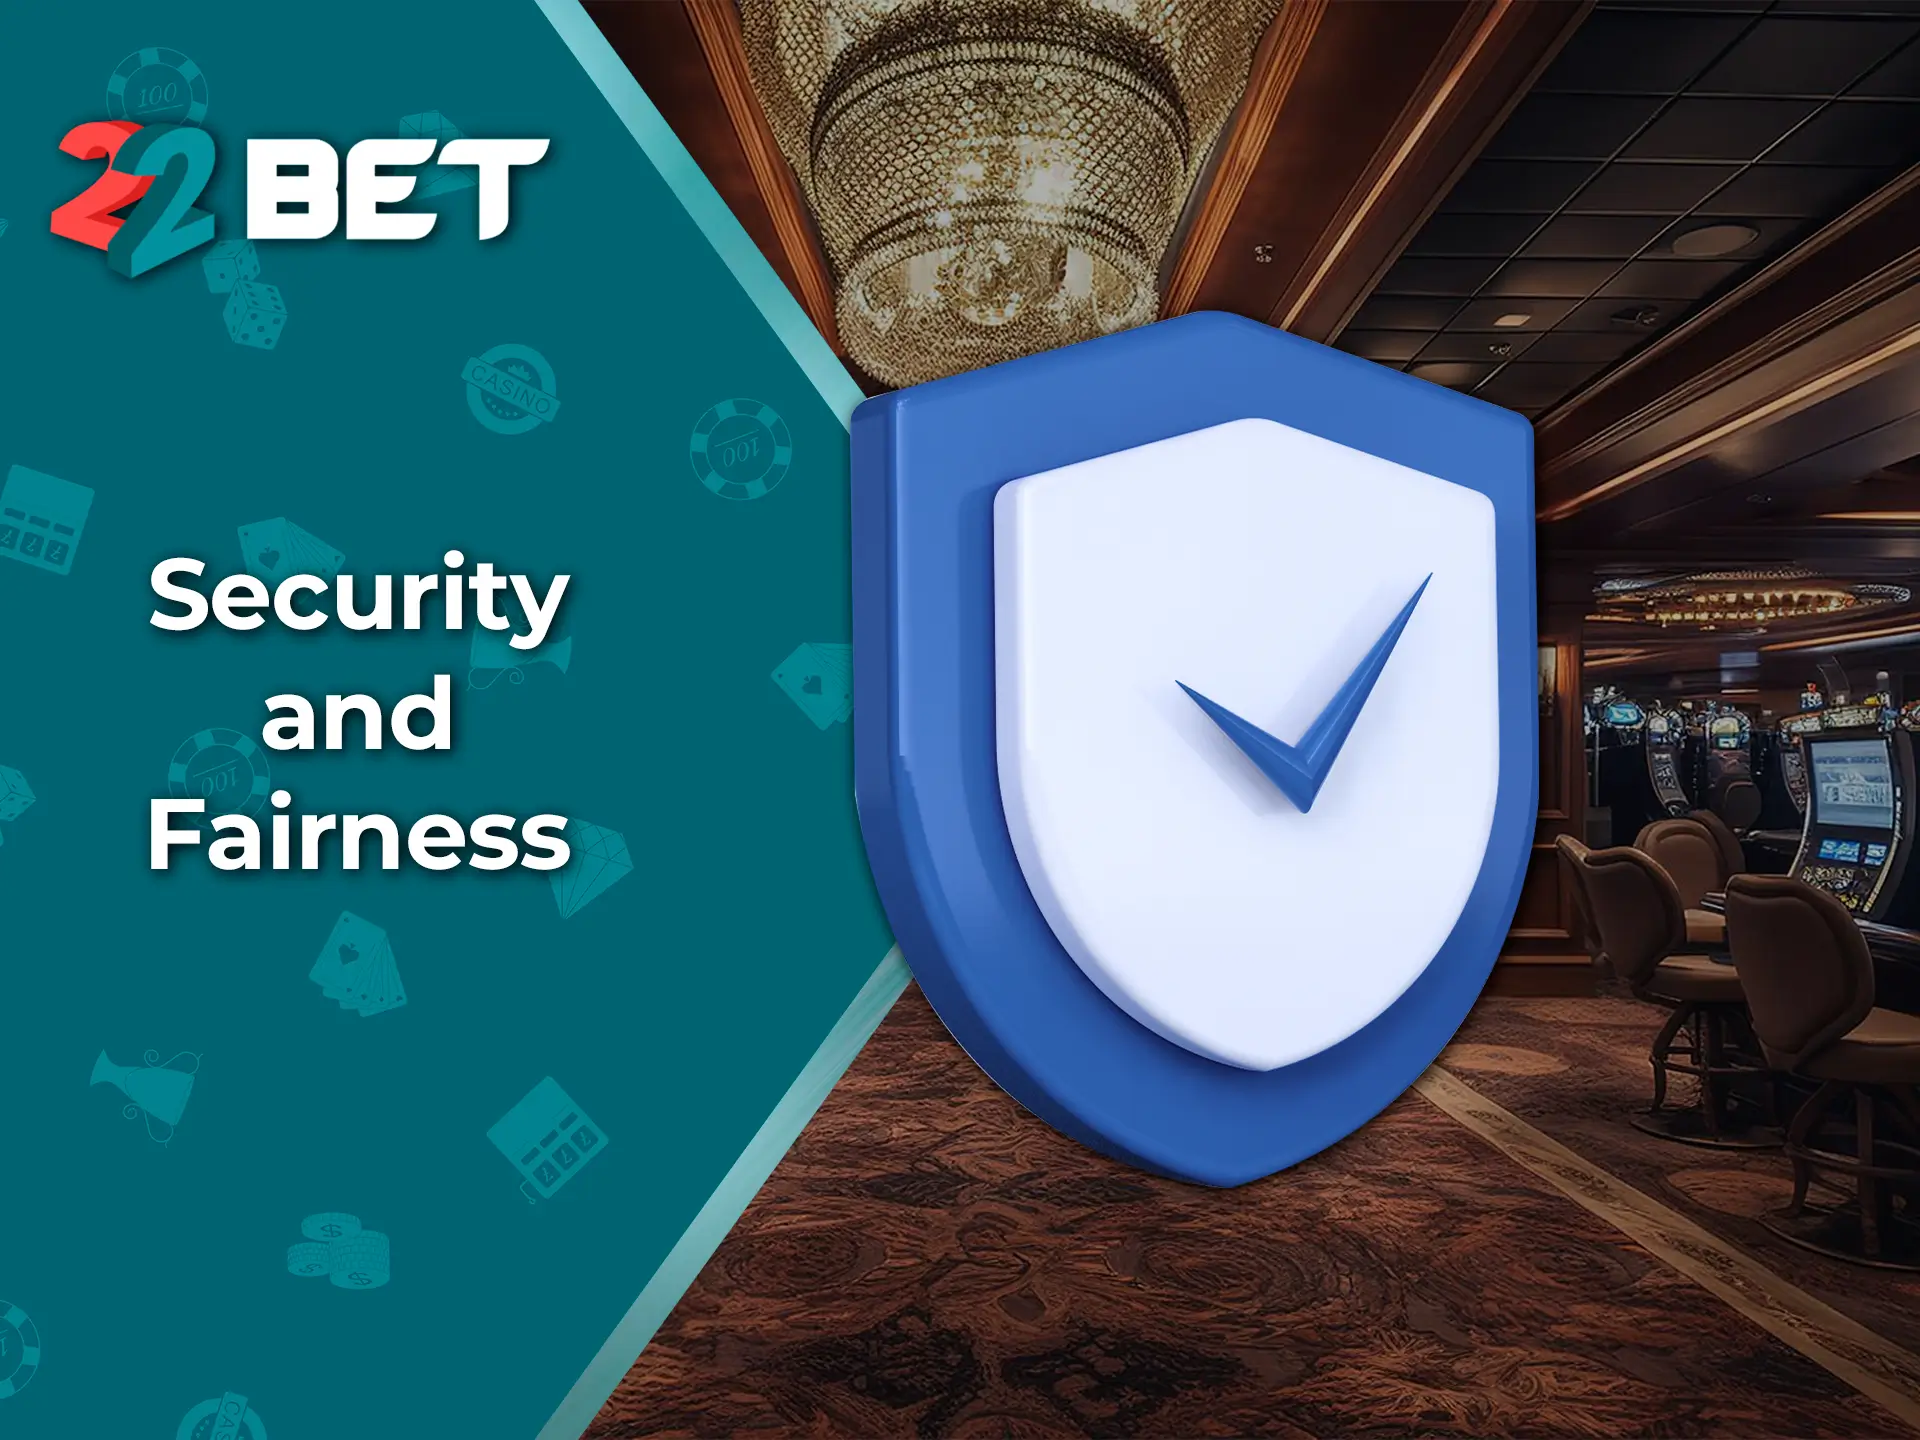 22Bet is an innovative casino with a high level of protection and security of its customers' data.